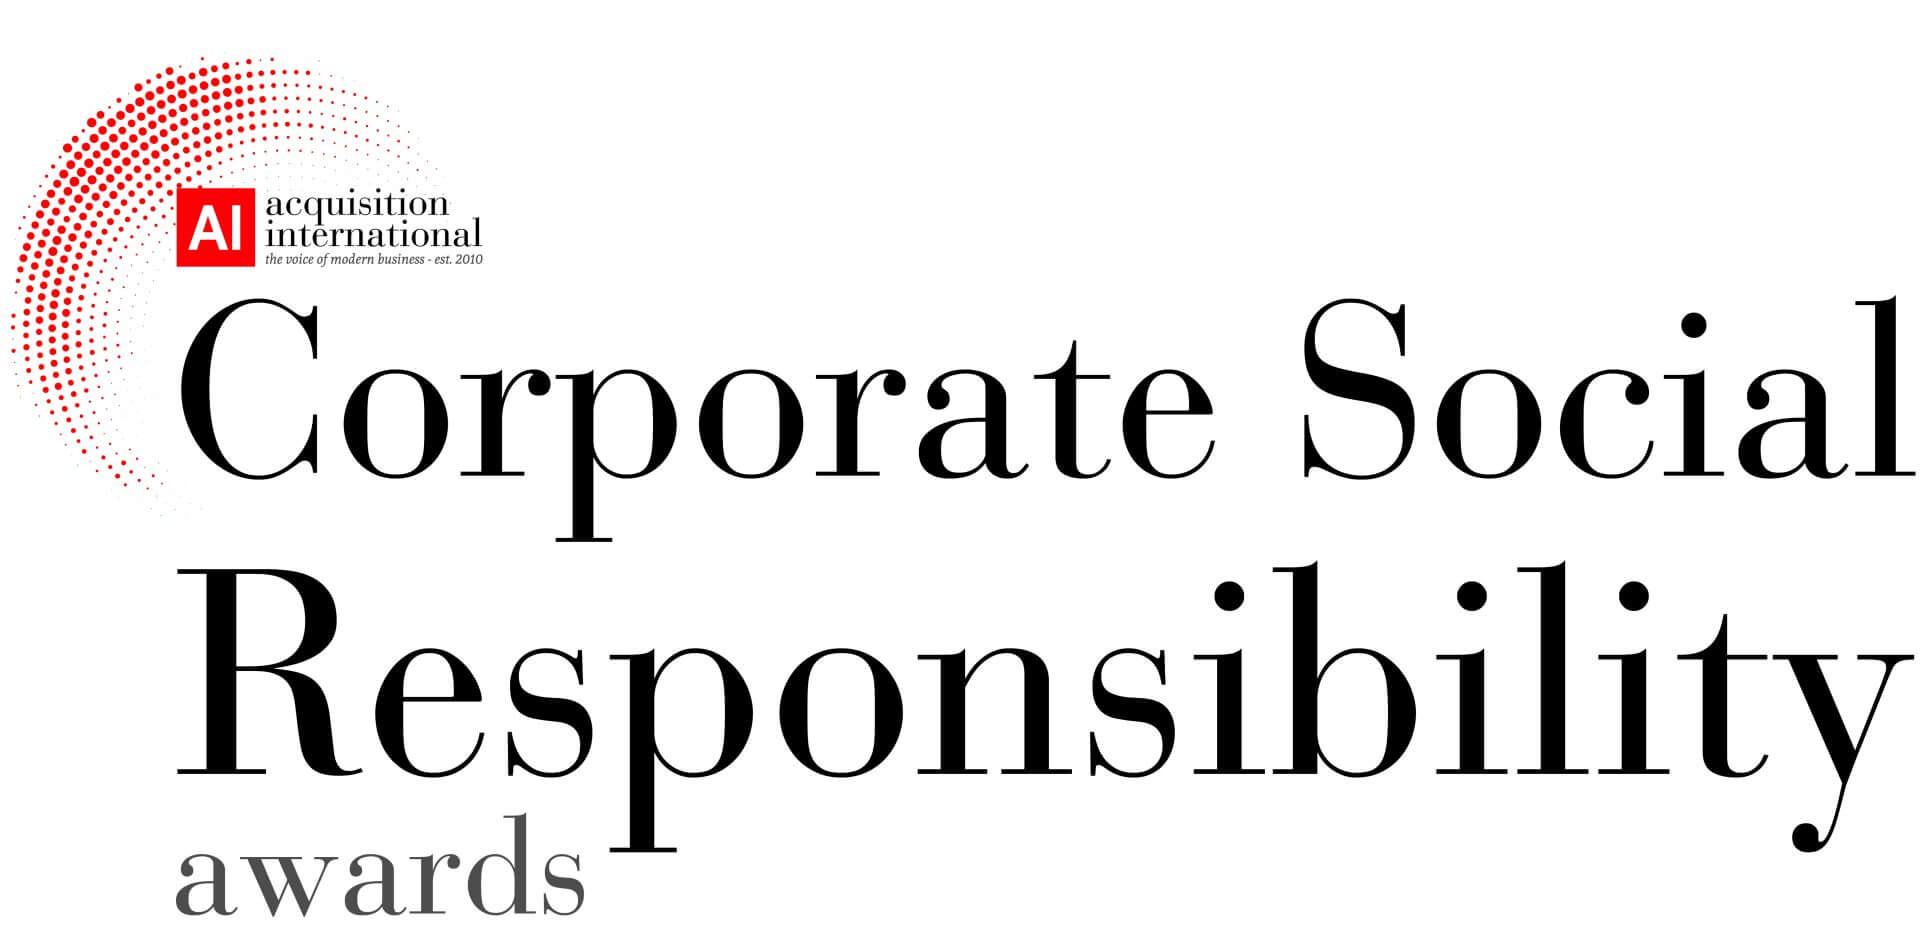 Corporate Social Responsibility Awards Acquisition International